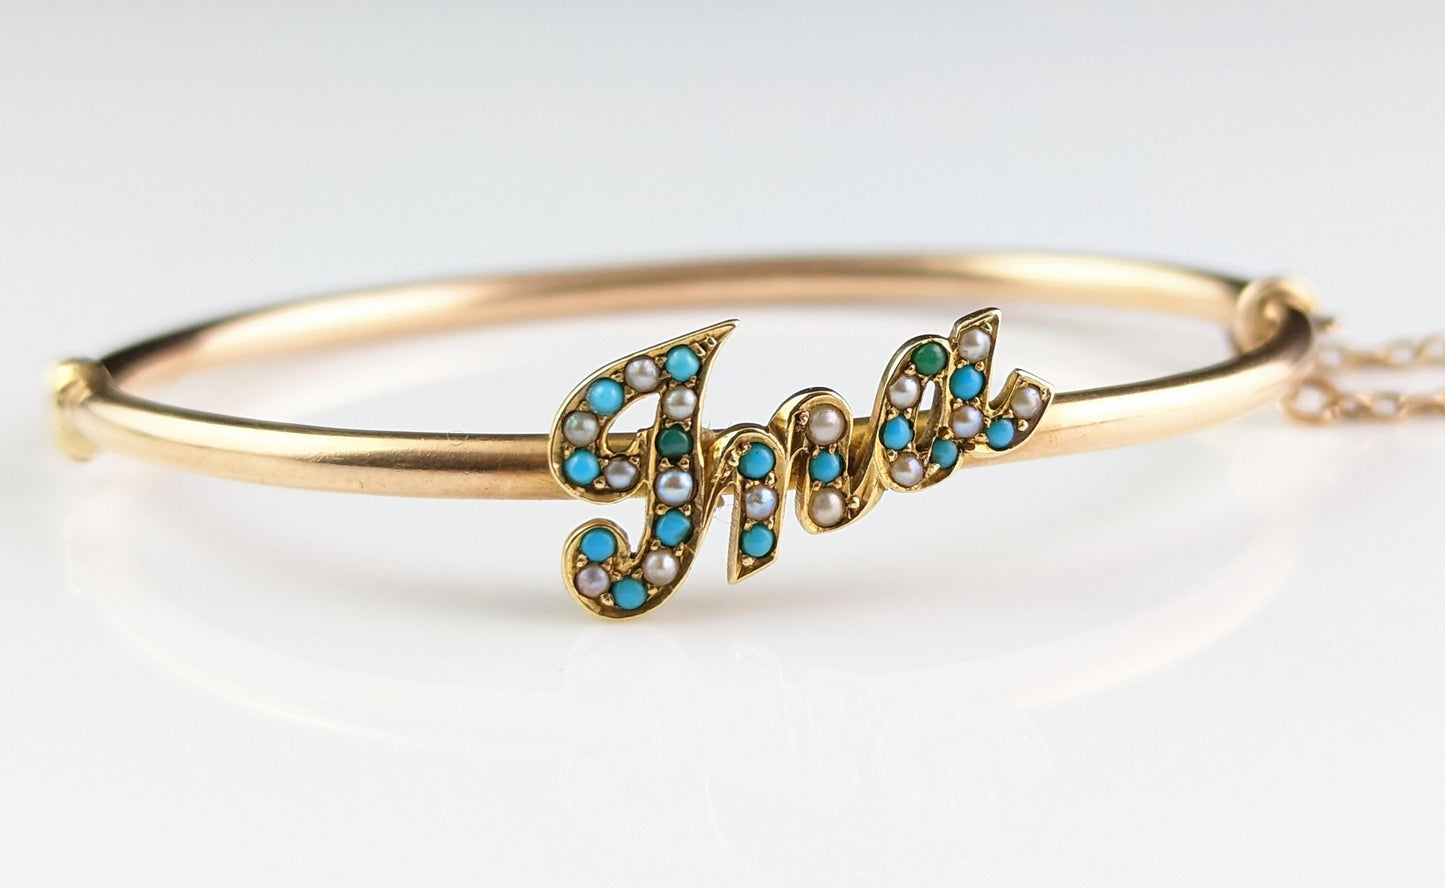 Antique 15ct gold name bangle, Ina, Turquoise and Pearl